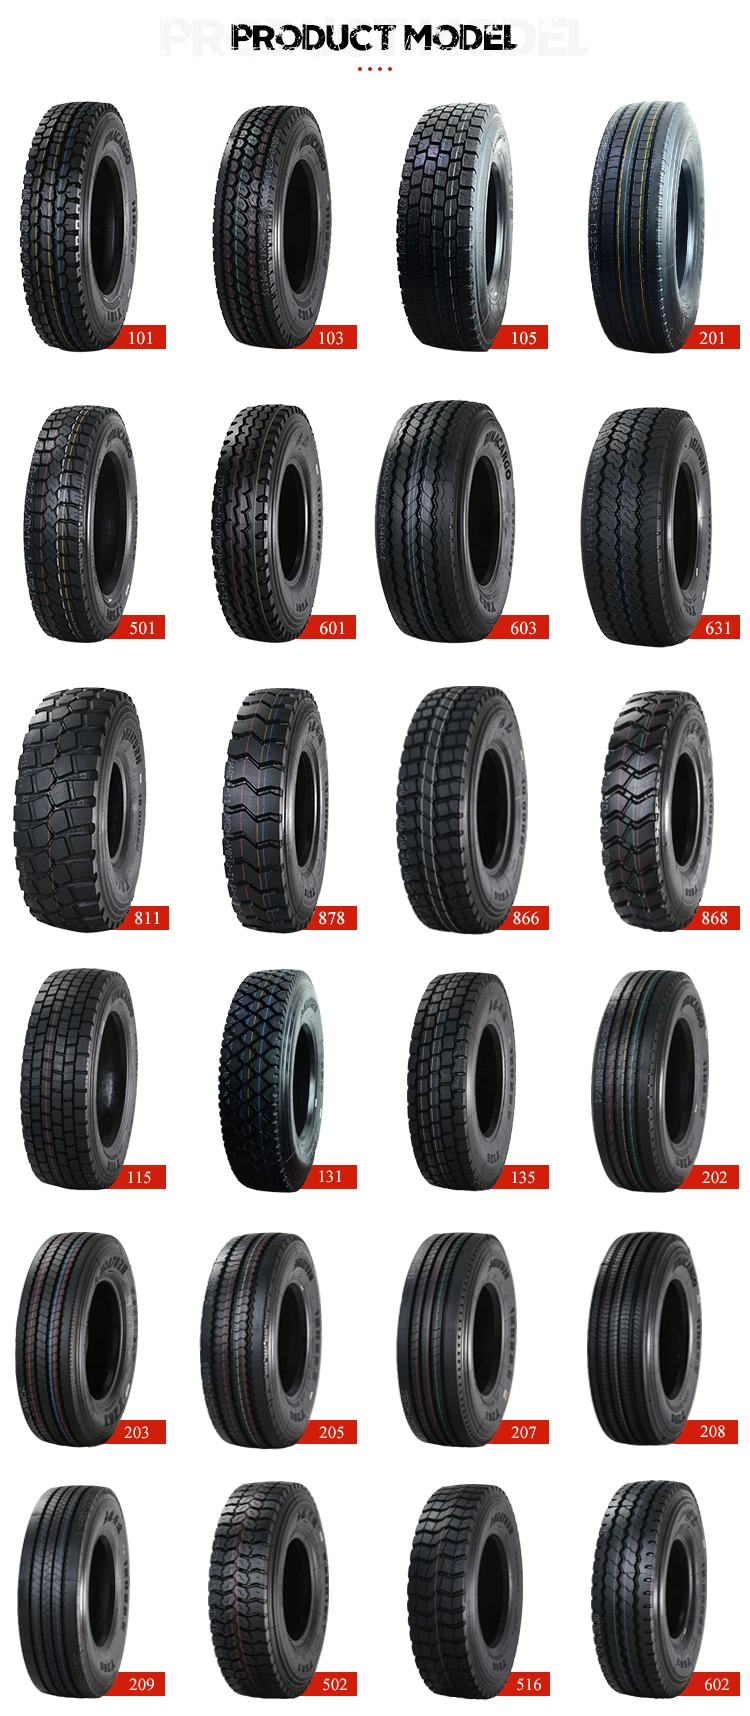 E-7 Tyre Road Roller Tyre with Best Prices OTR Tyre (23.1-26, 16.00-20)